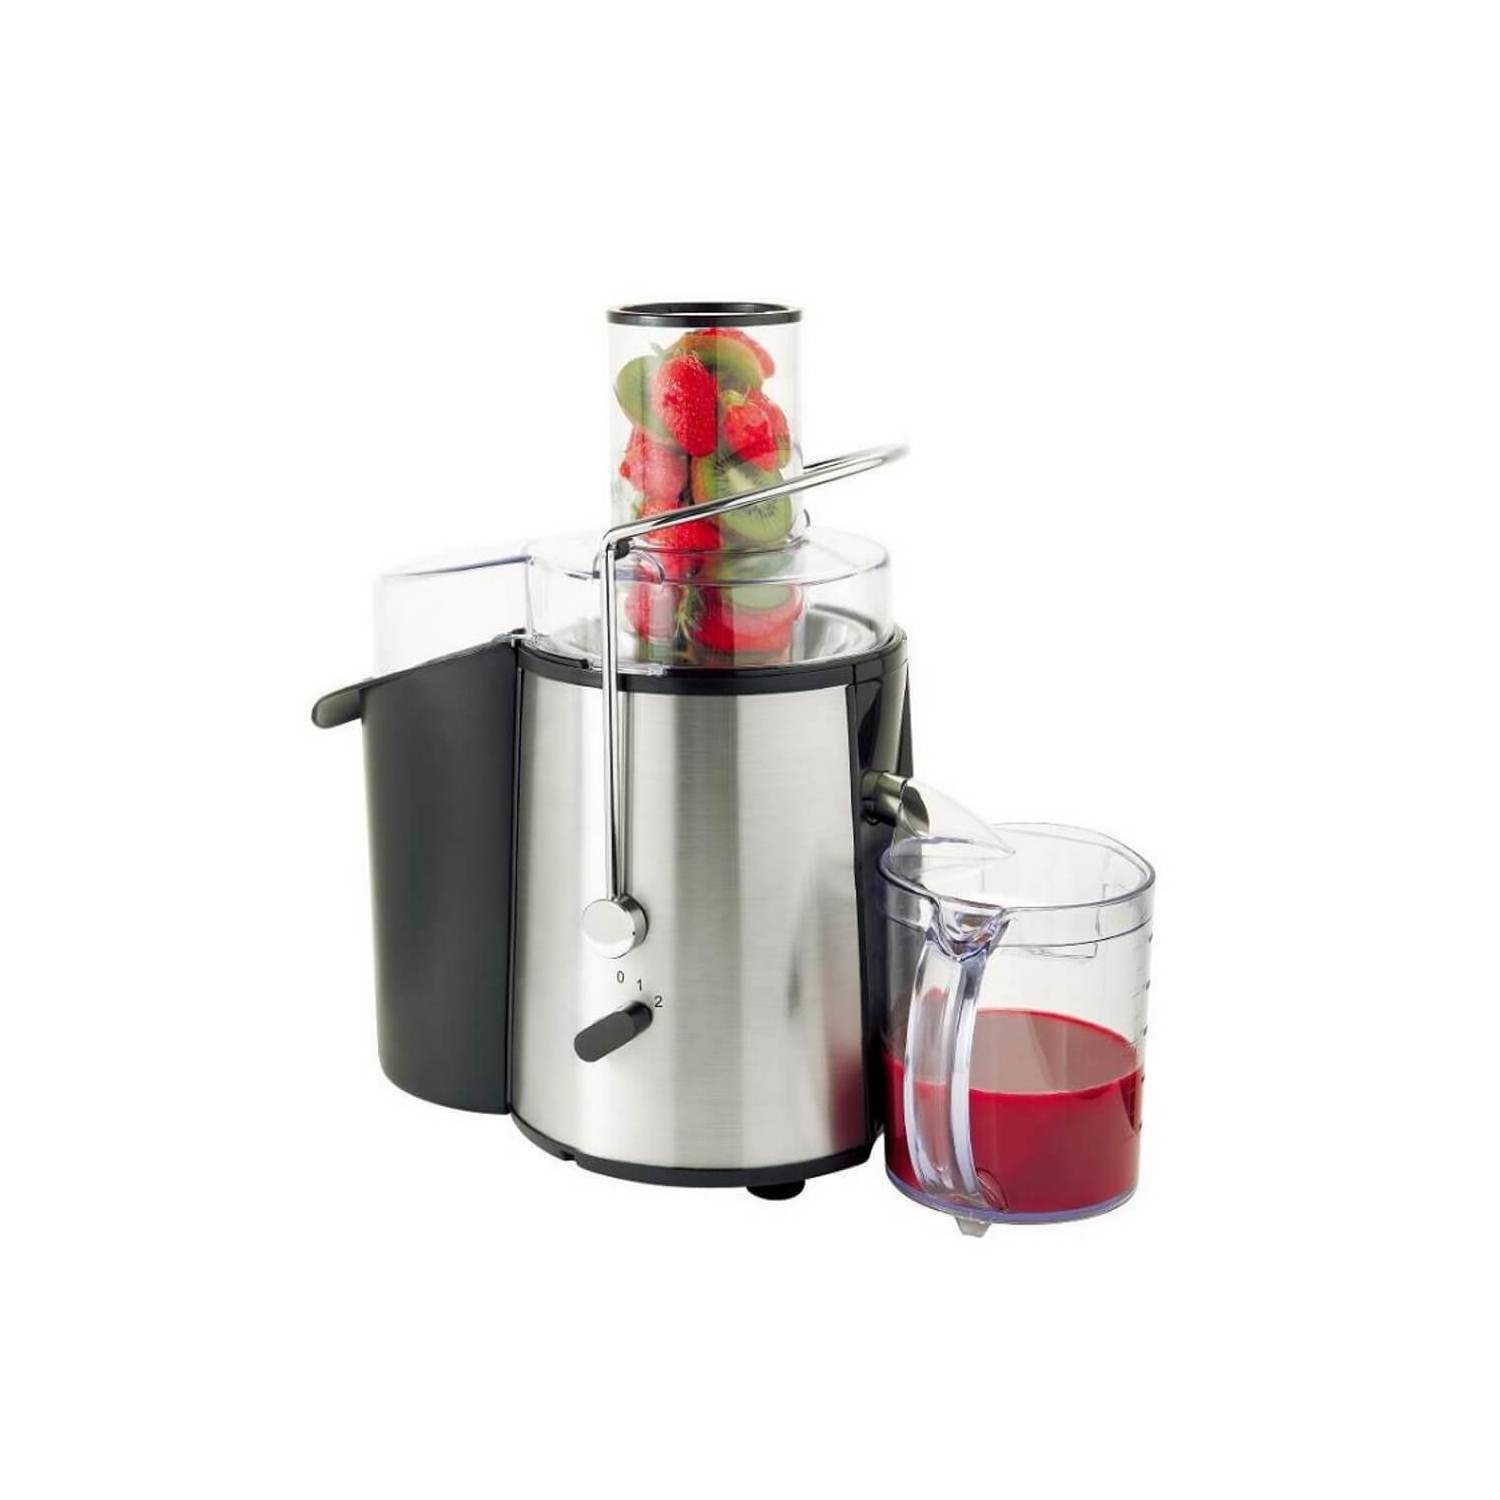 Juicing Machine For Whole Fruit - 990W Power Juicer